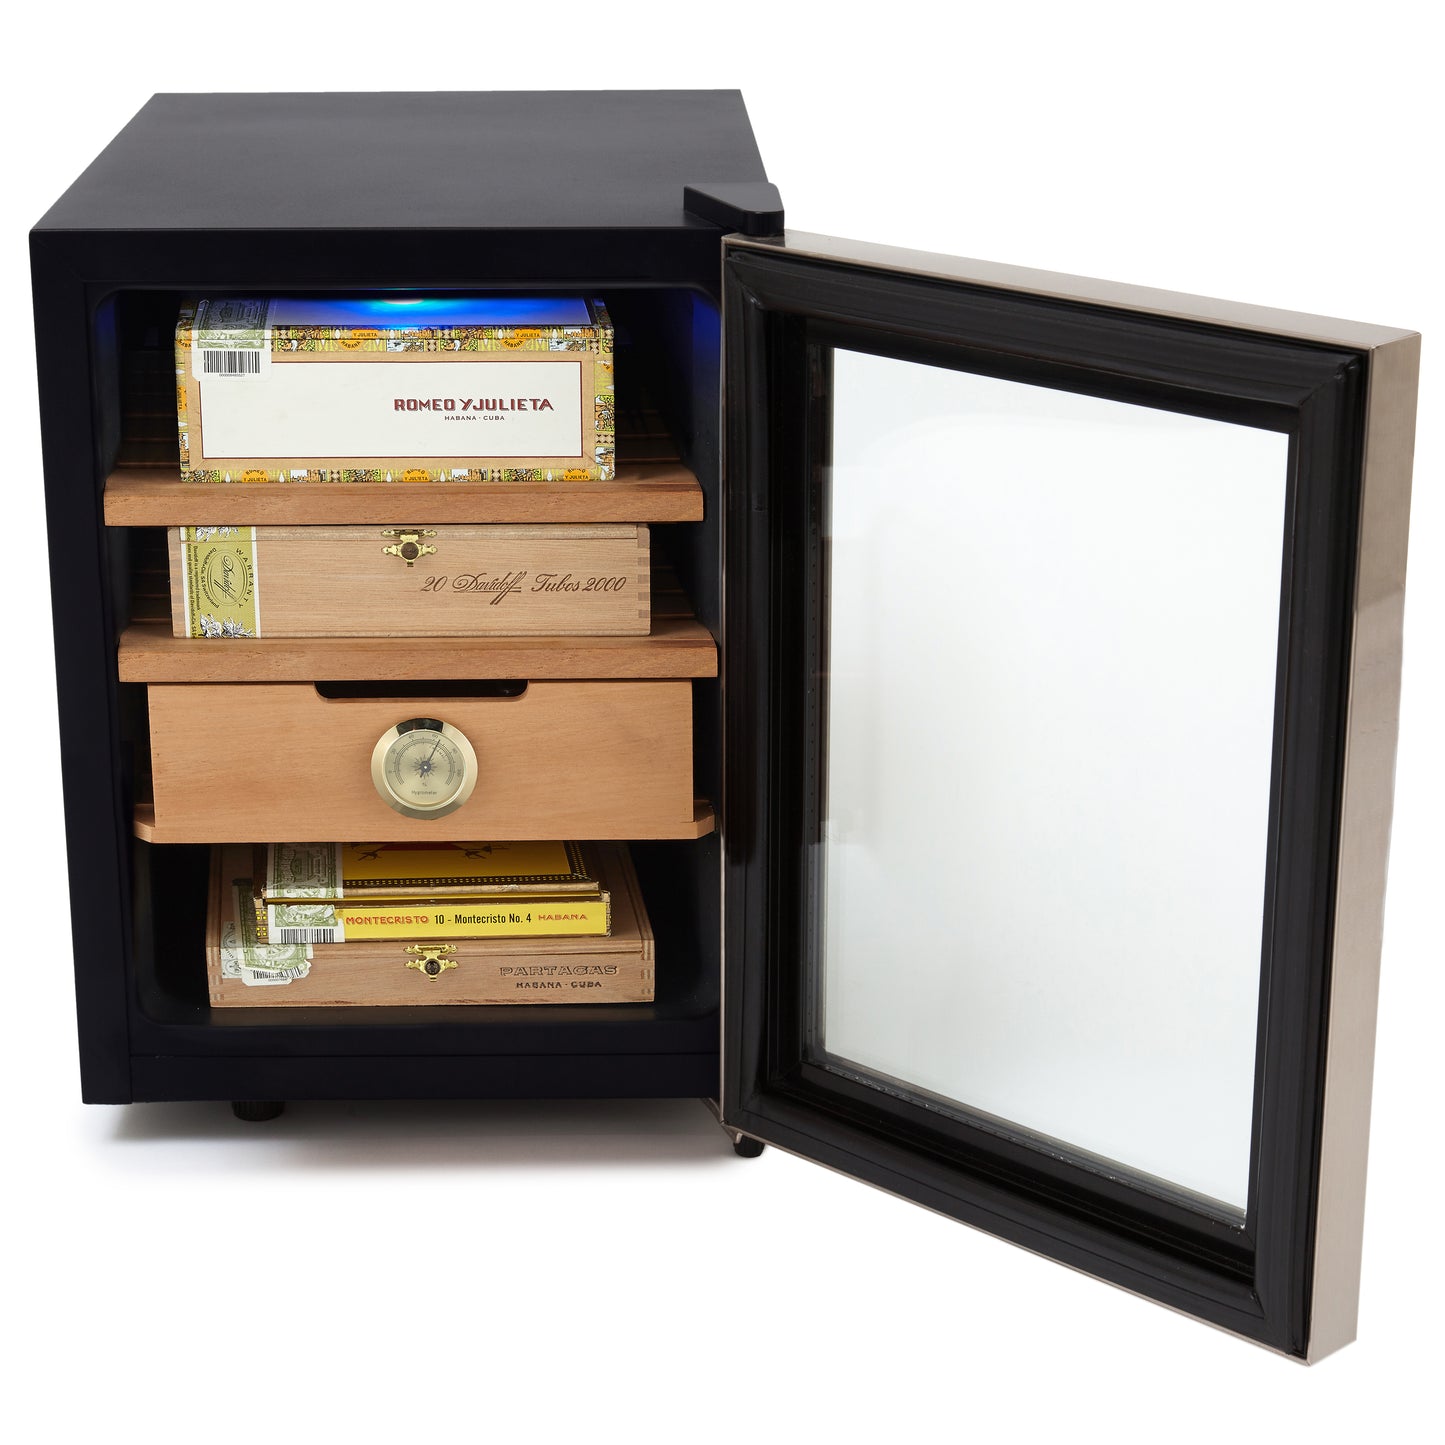 Buy a Whynter Elite Touch Control Stainless 1.2 cu.ft. Cigar Cooler Humidor by Chilled Beverages